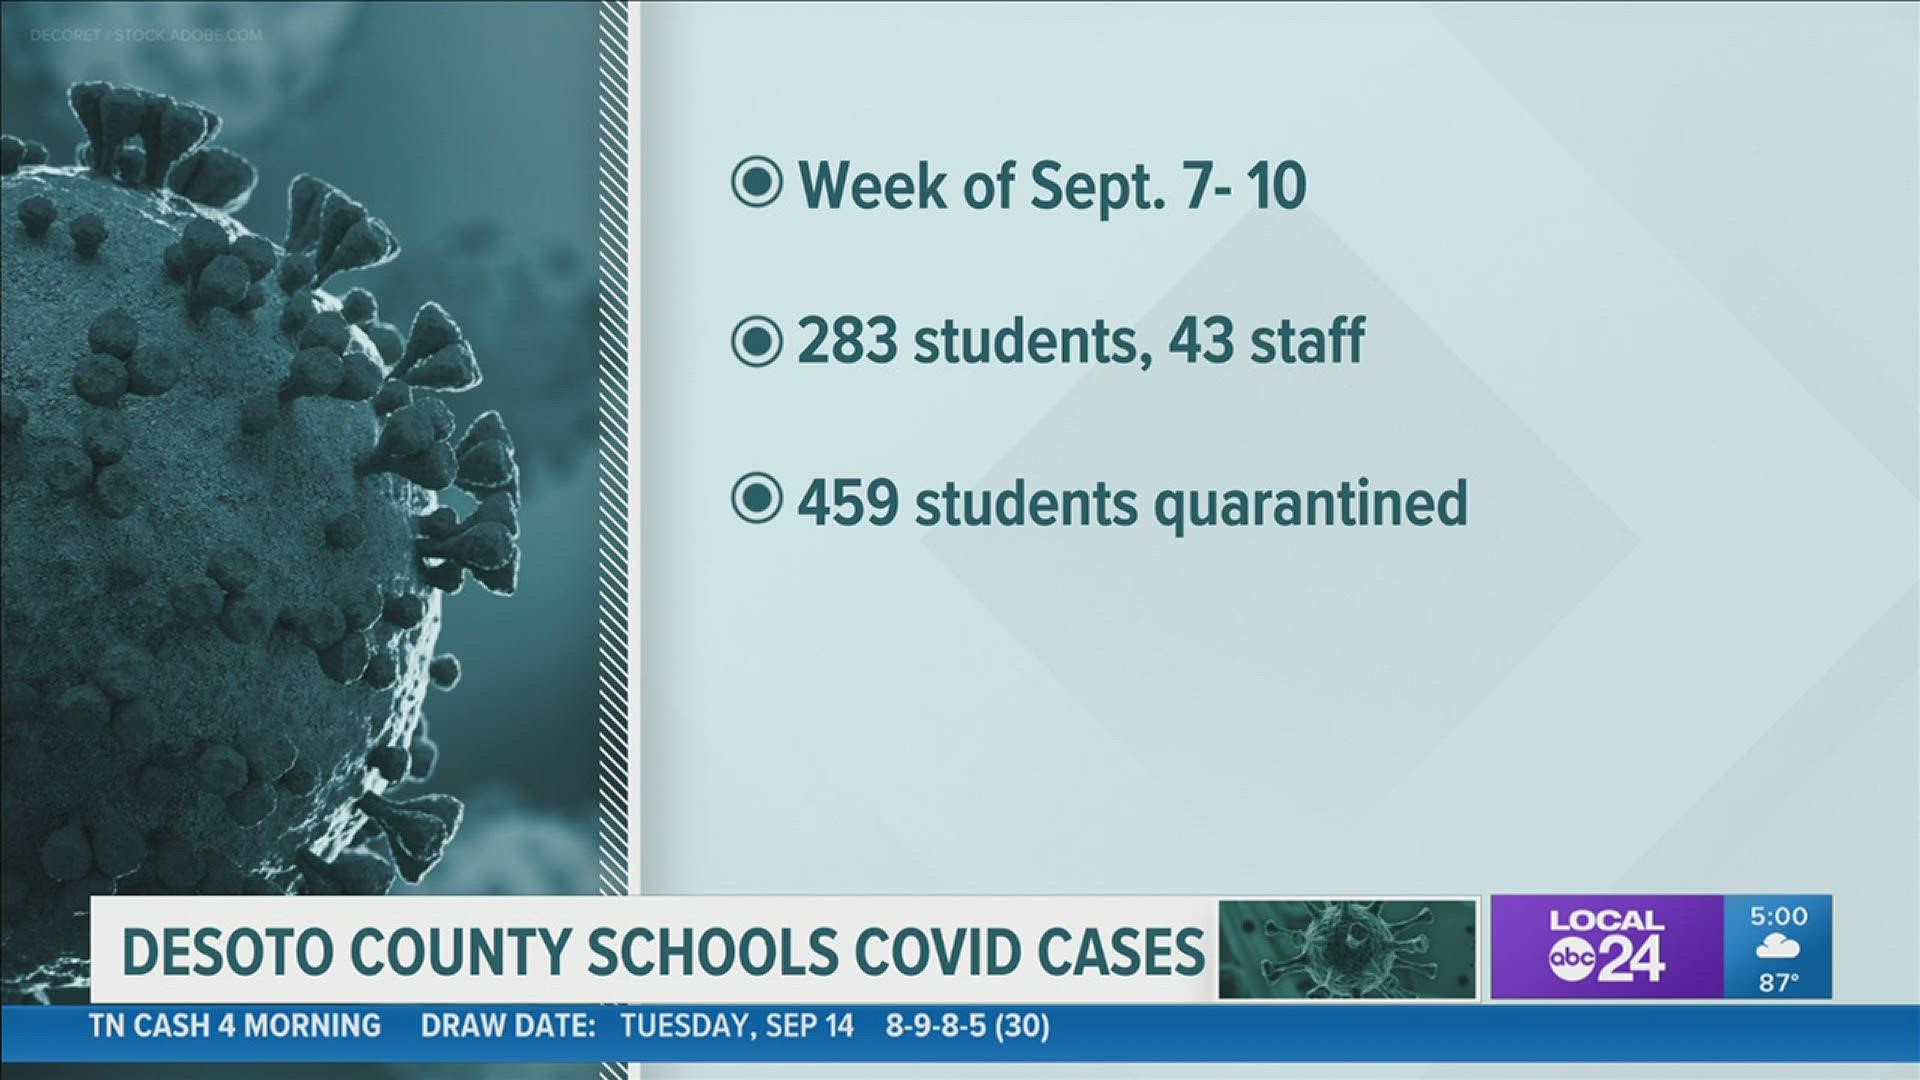 DCS said that 459 students have been quarantined due to close contact at school, for the week of September 7-10th.